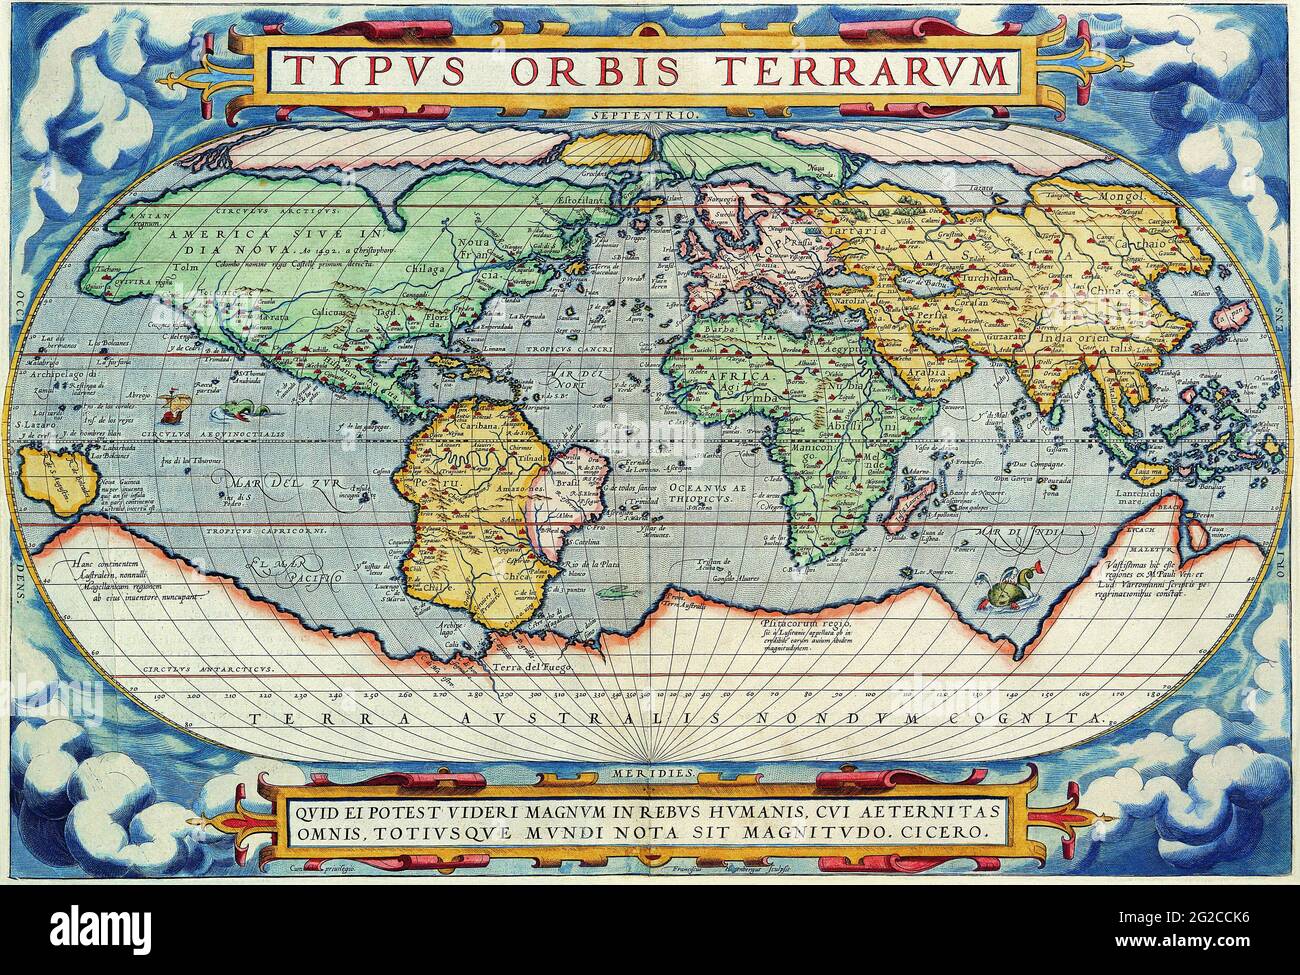 Antique Maps of the World, Map of the World, World Map, Retro World Map, Vintage World Map, Retro World Map, World Print, Abraham Ortelius, c 1570 Stock Photo